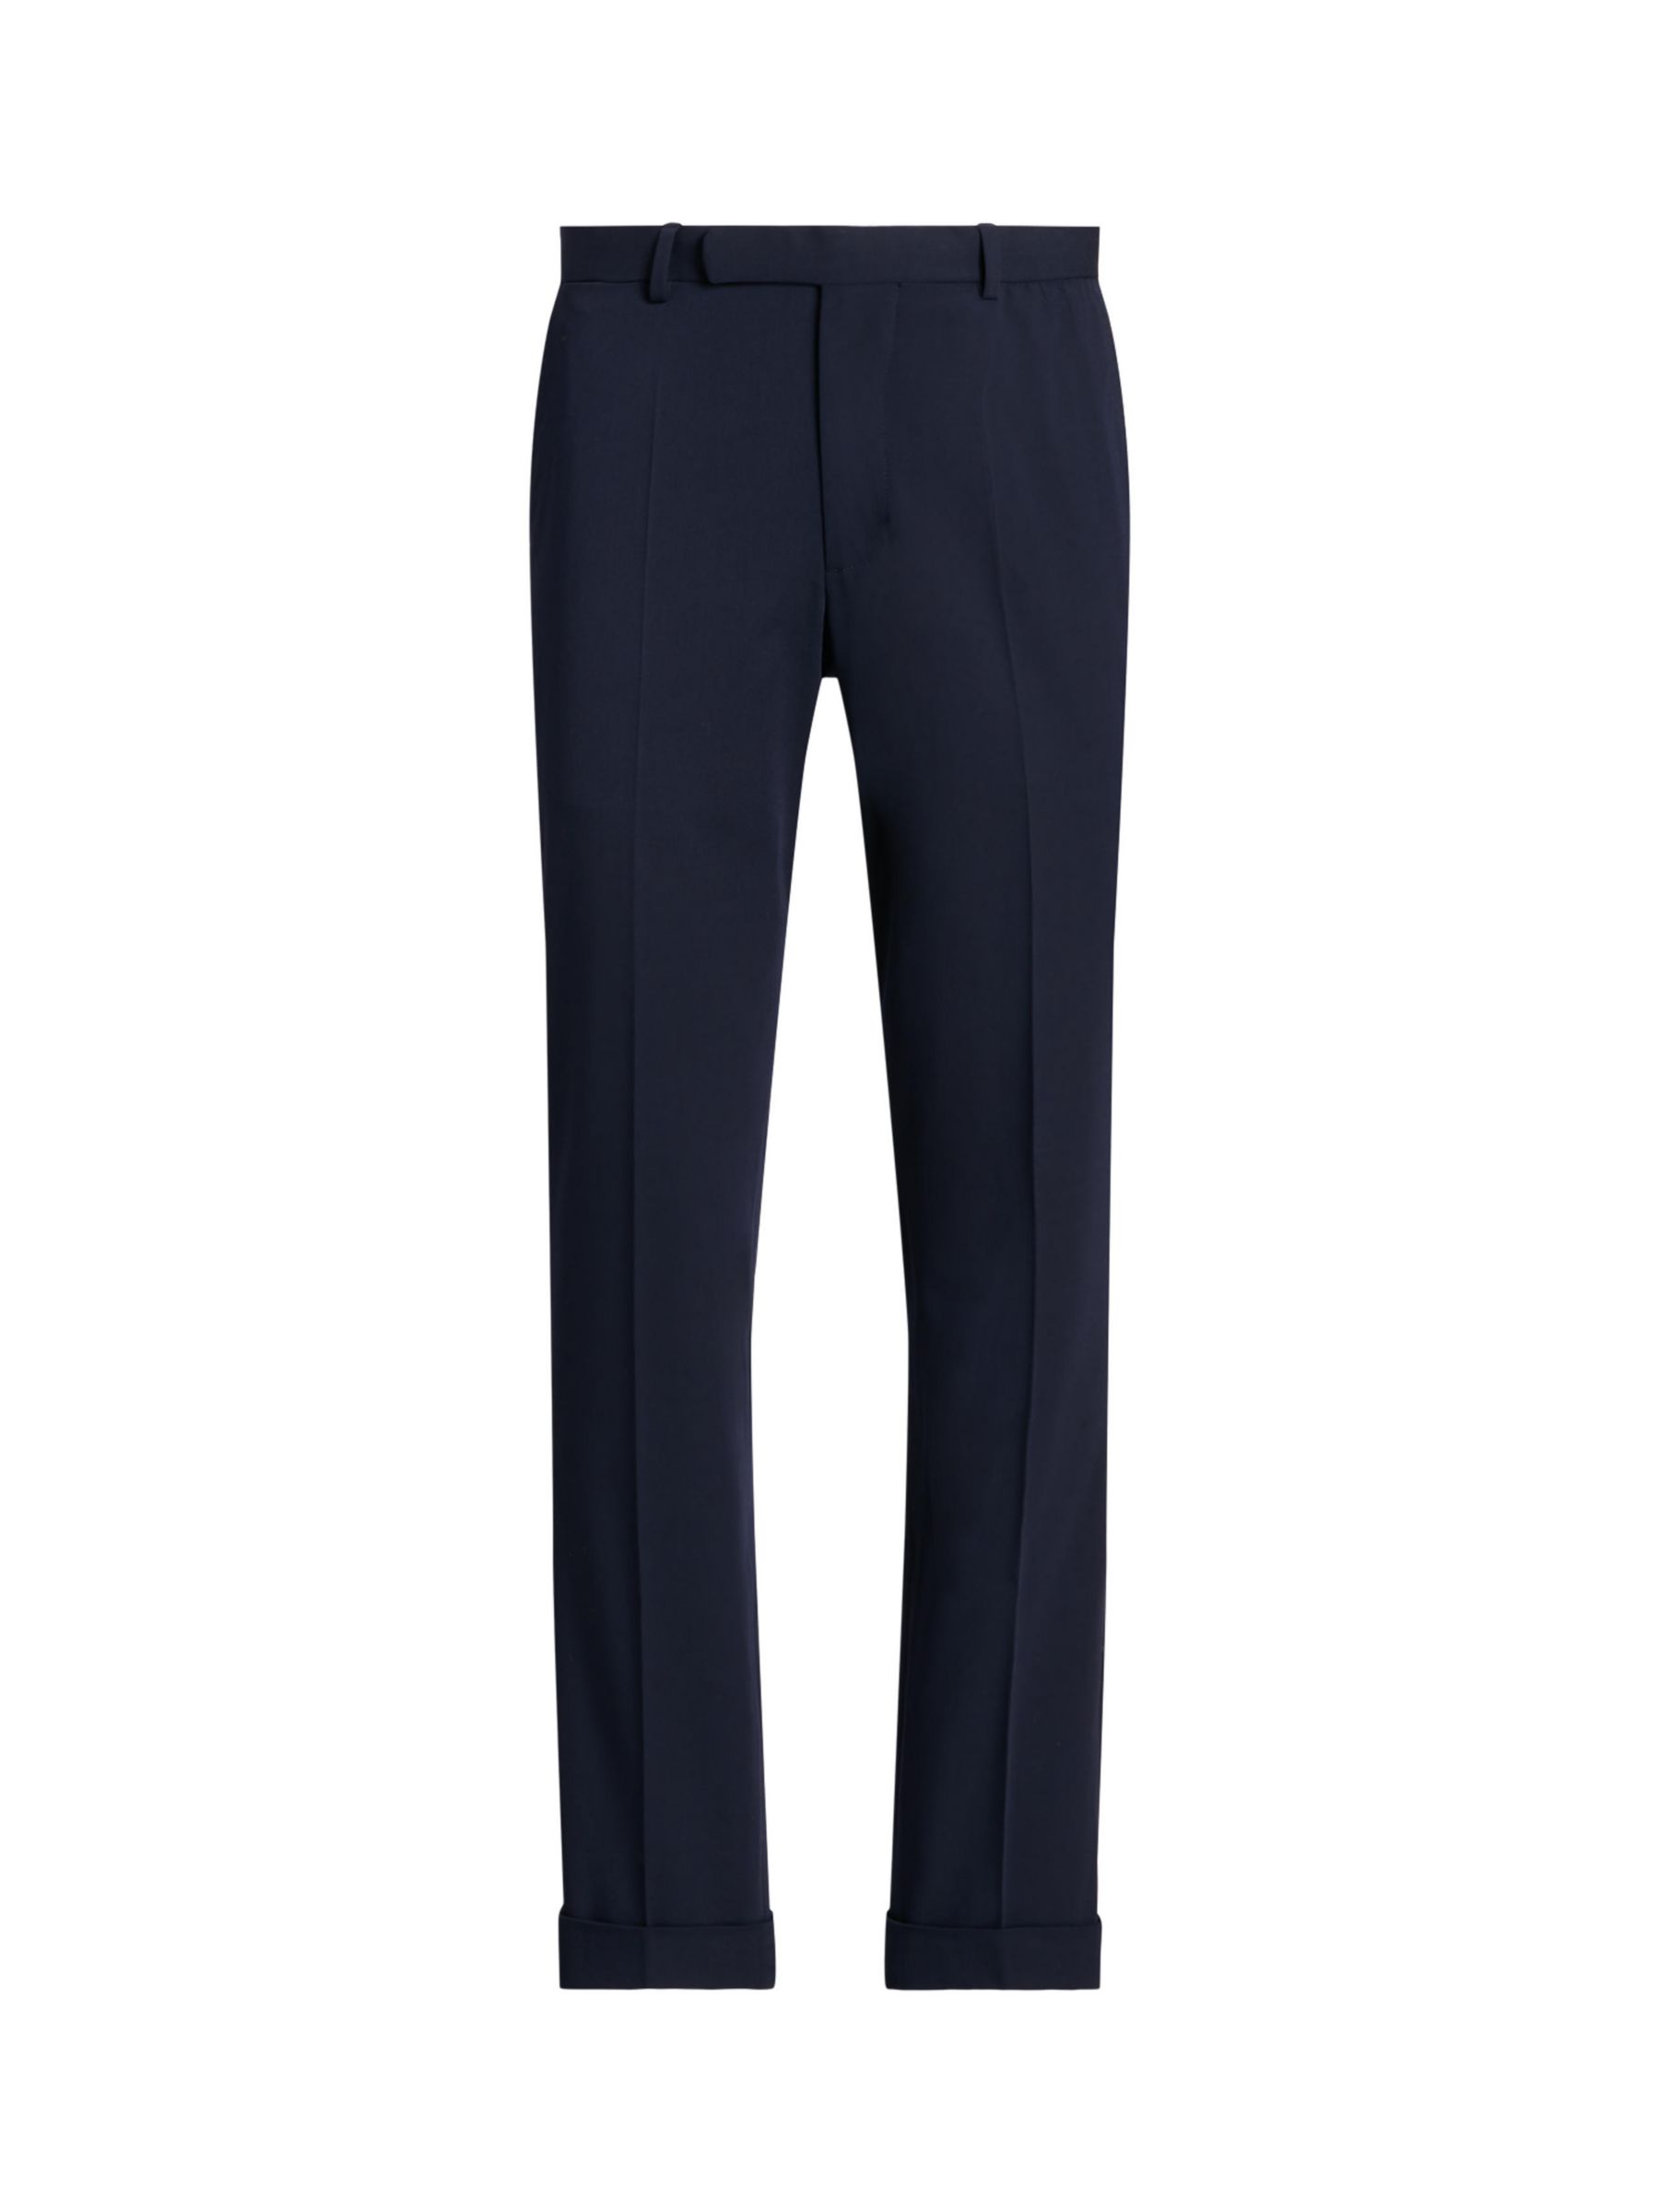 Buy Polo Ralph Lauren Performance Stretch Twill Suit Trouser, Navy Online at johnlewis.com